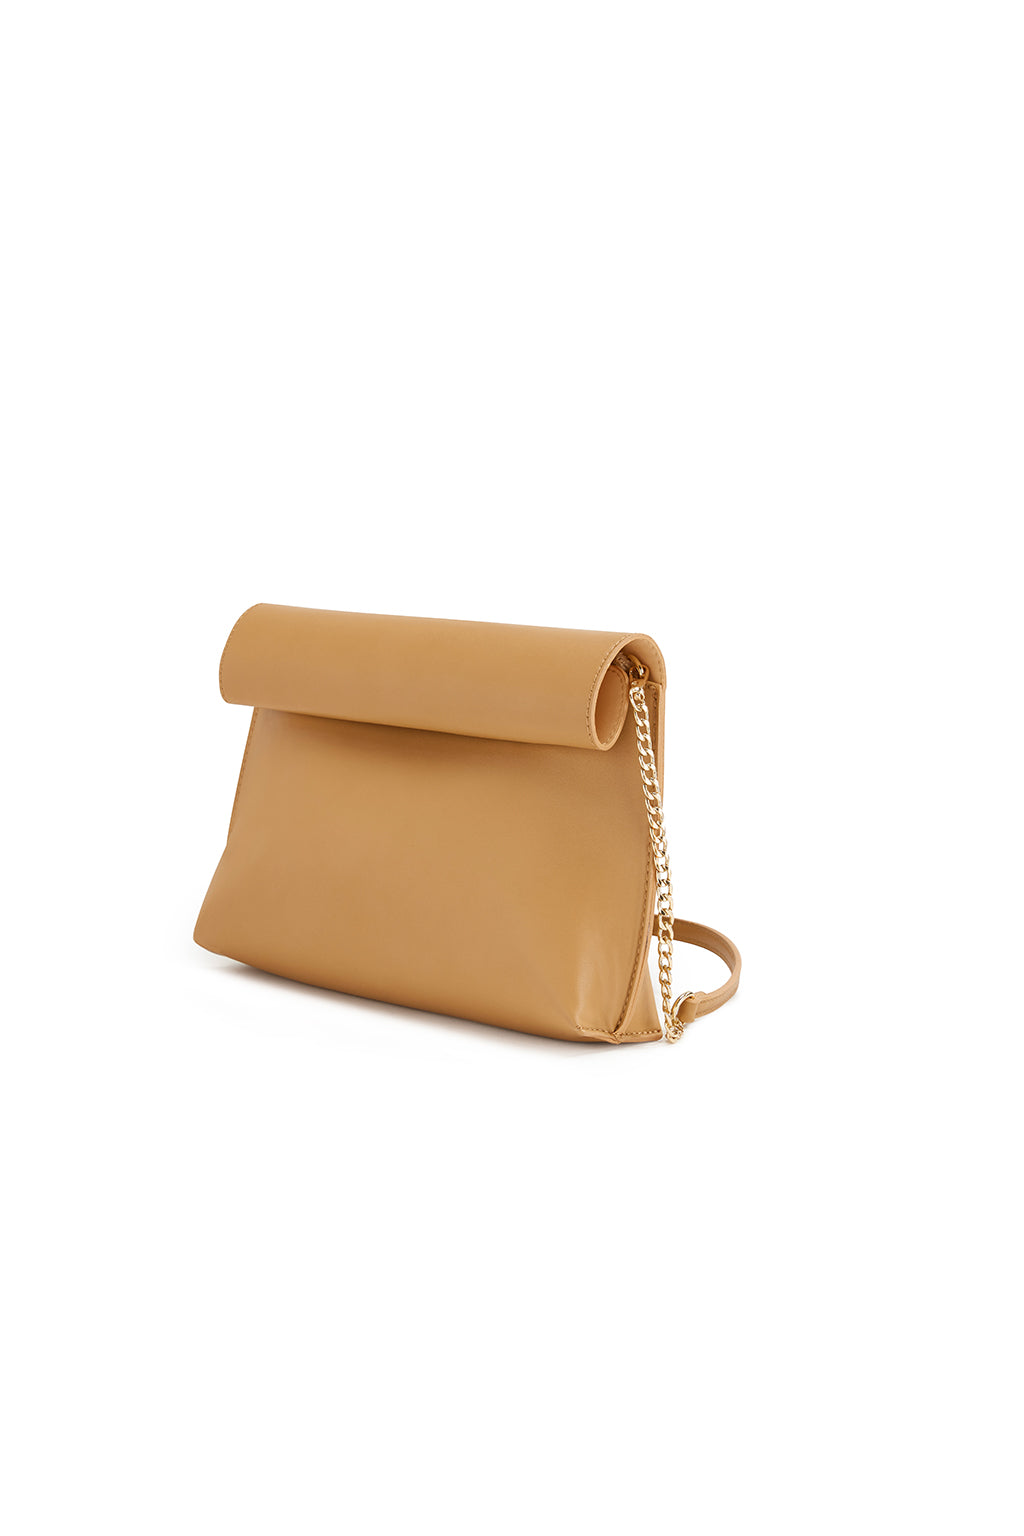 Structured Beauty Clutch | Rose Inc